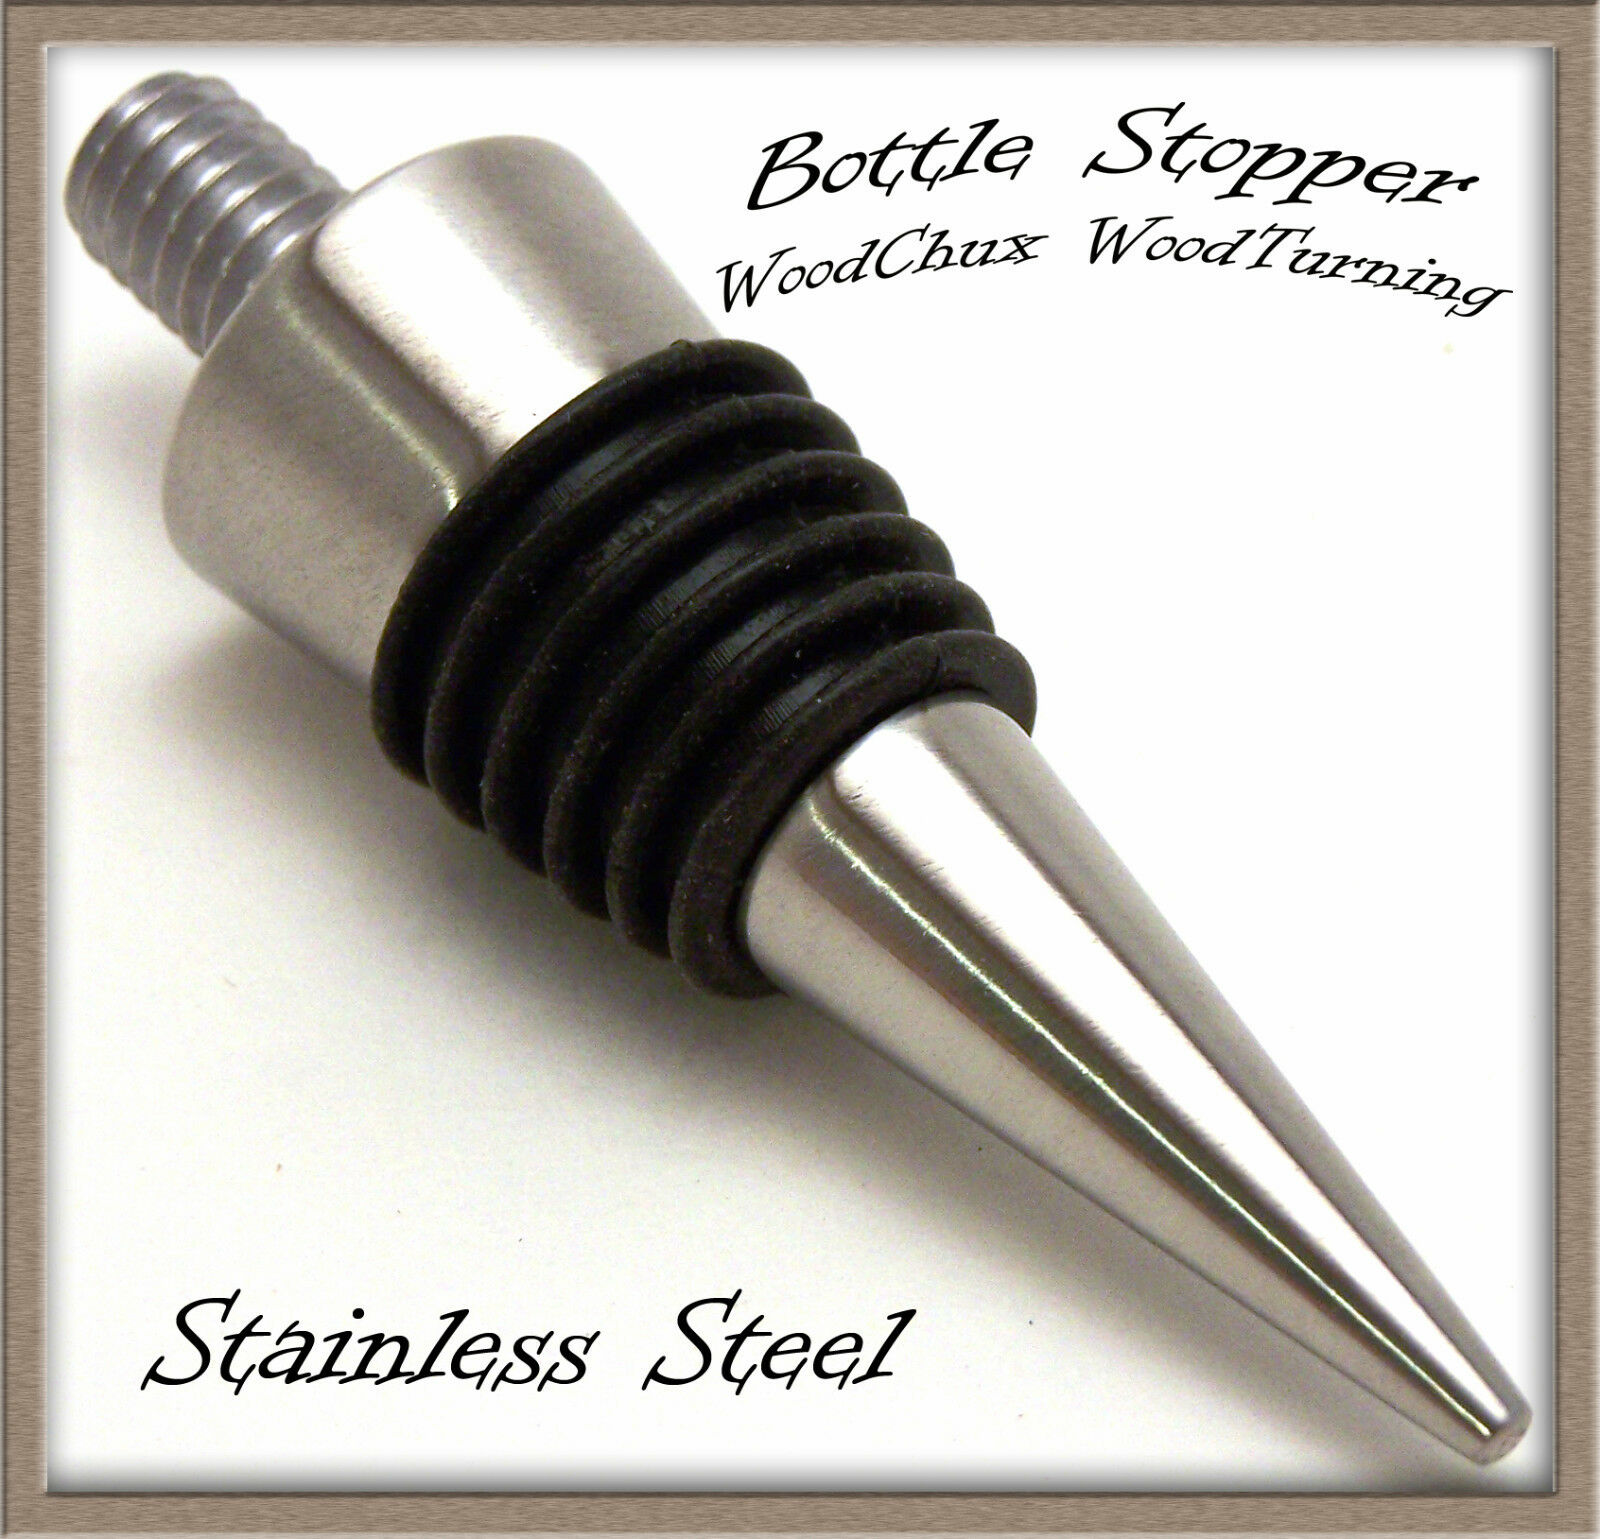 Stainless Steel Cone Bottle Stopper Kit Wood Lathe Fast Shipping Woodturning